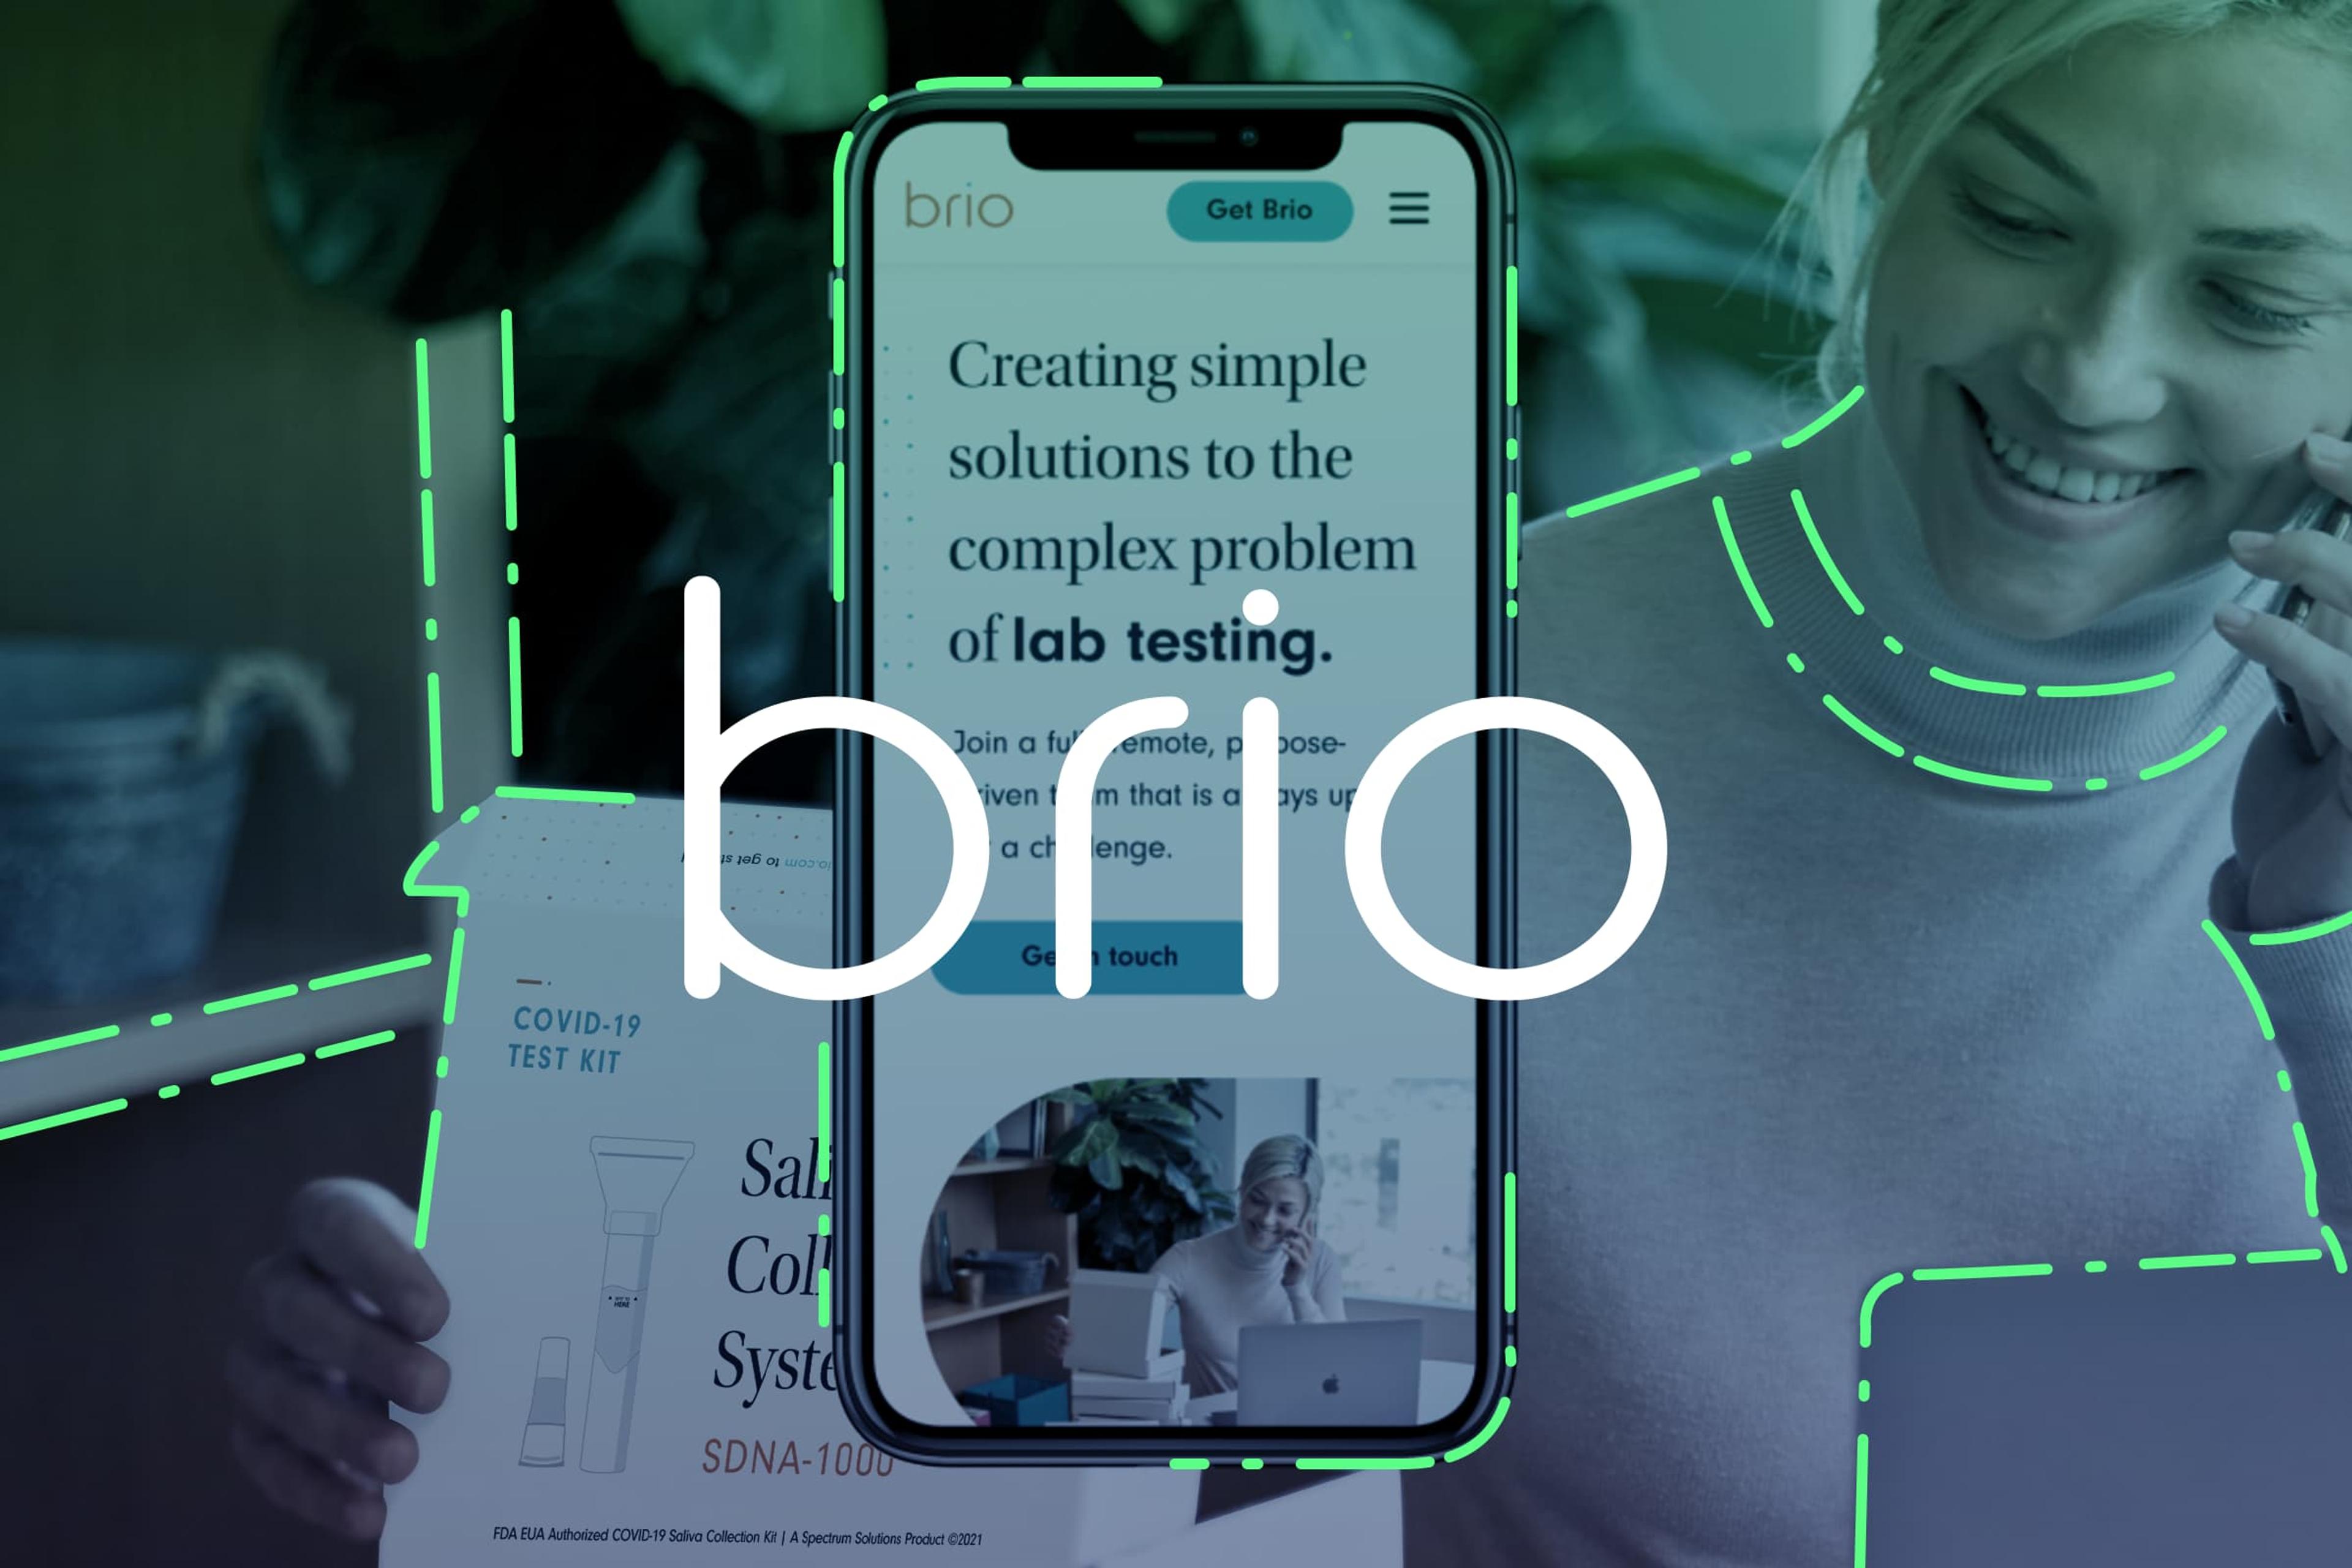 Brio improved their brand experience with Superside